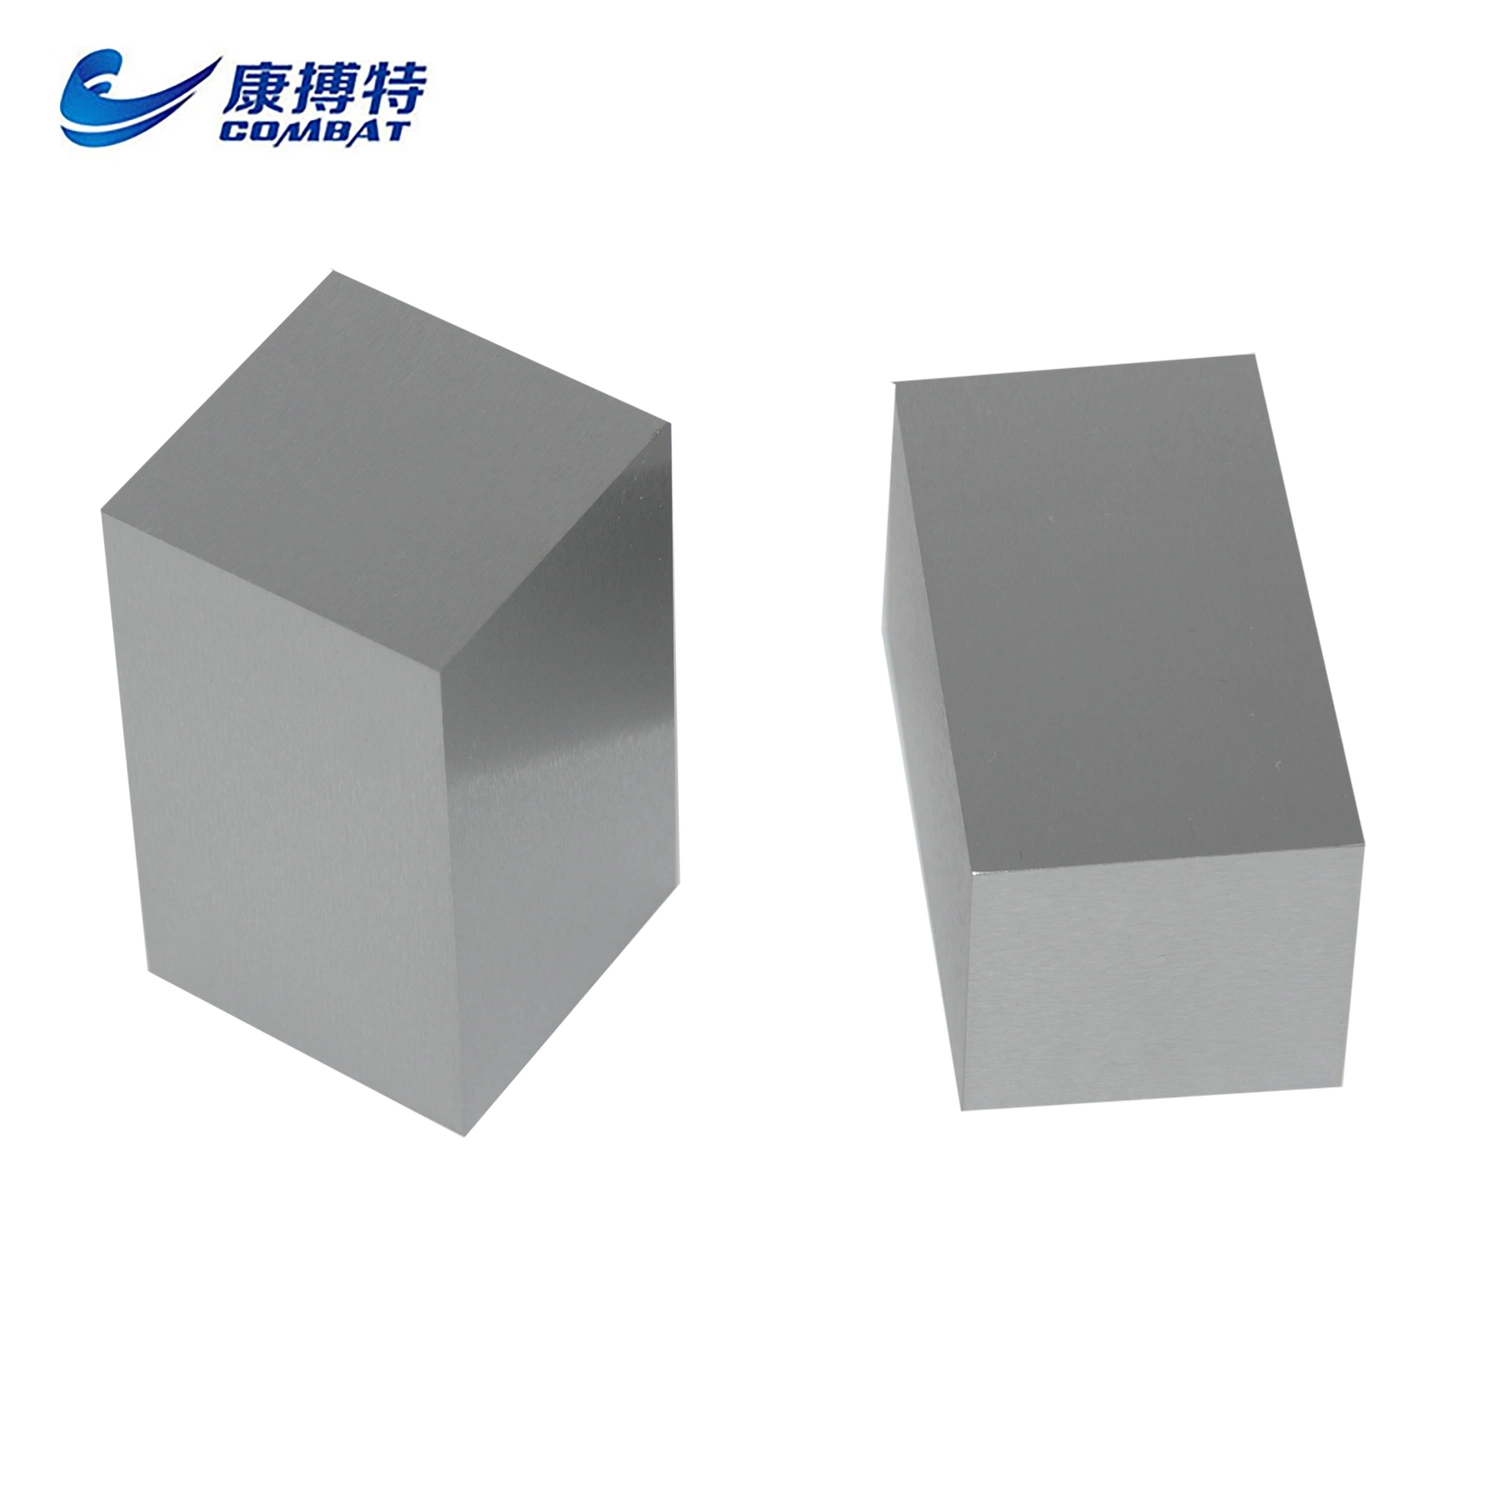 High Density and Purity Molybdenum Ingots Block Products